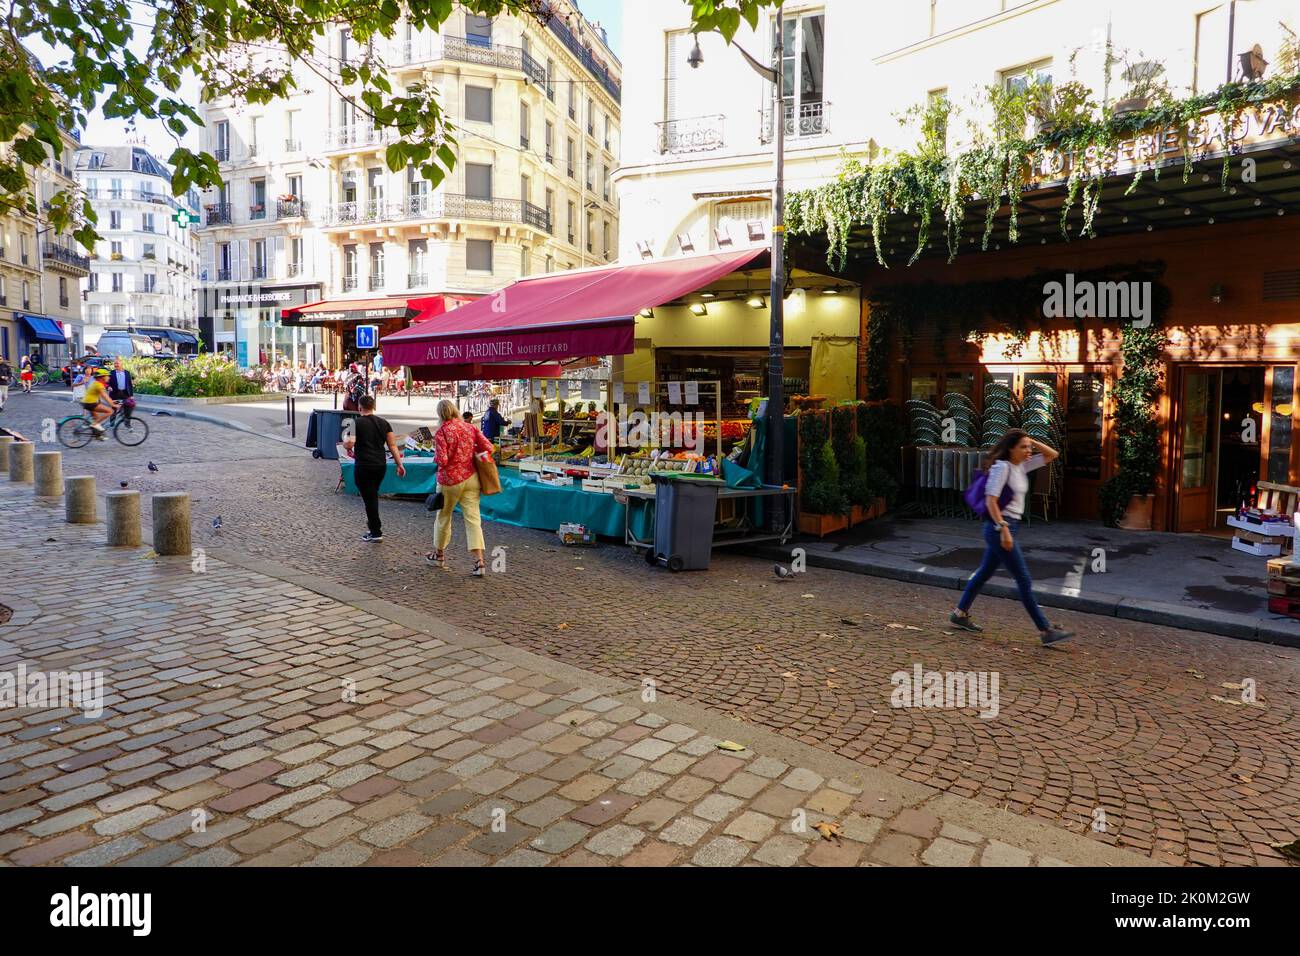 People walking past a fruit and vegetable shop off Pl. Georges Moustaki in the rue Mouffetard area, 5th Arrondissement, Paris, France. Stock Photo